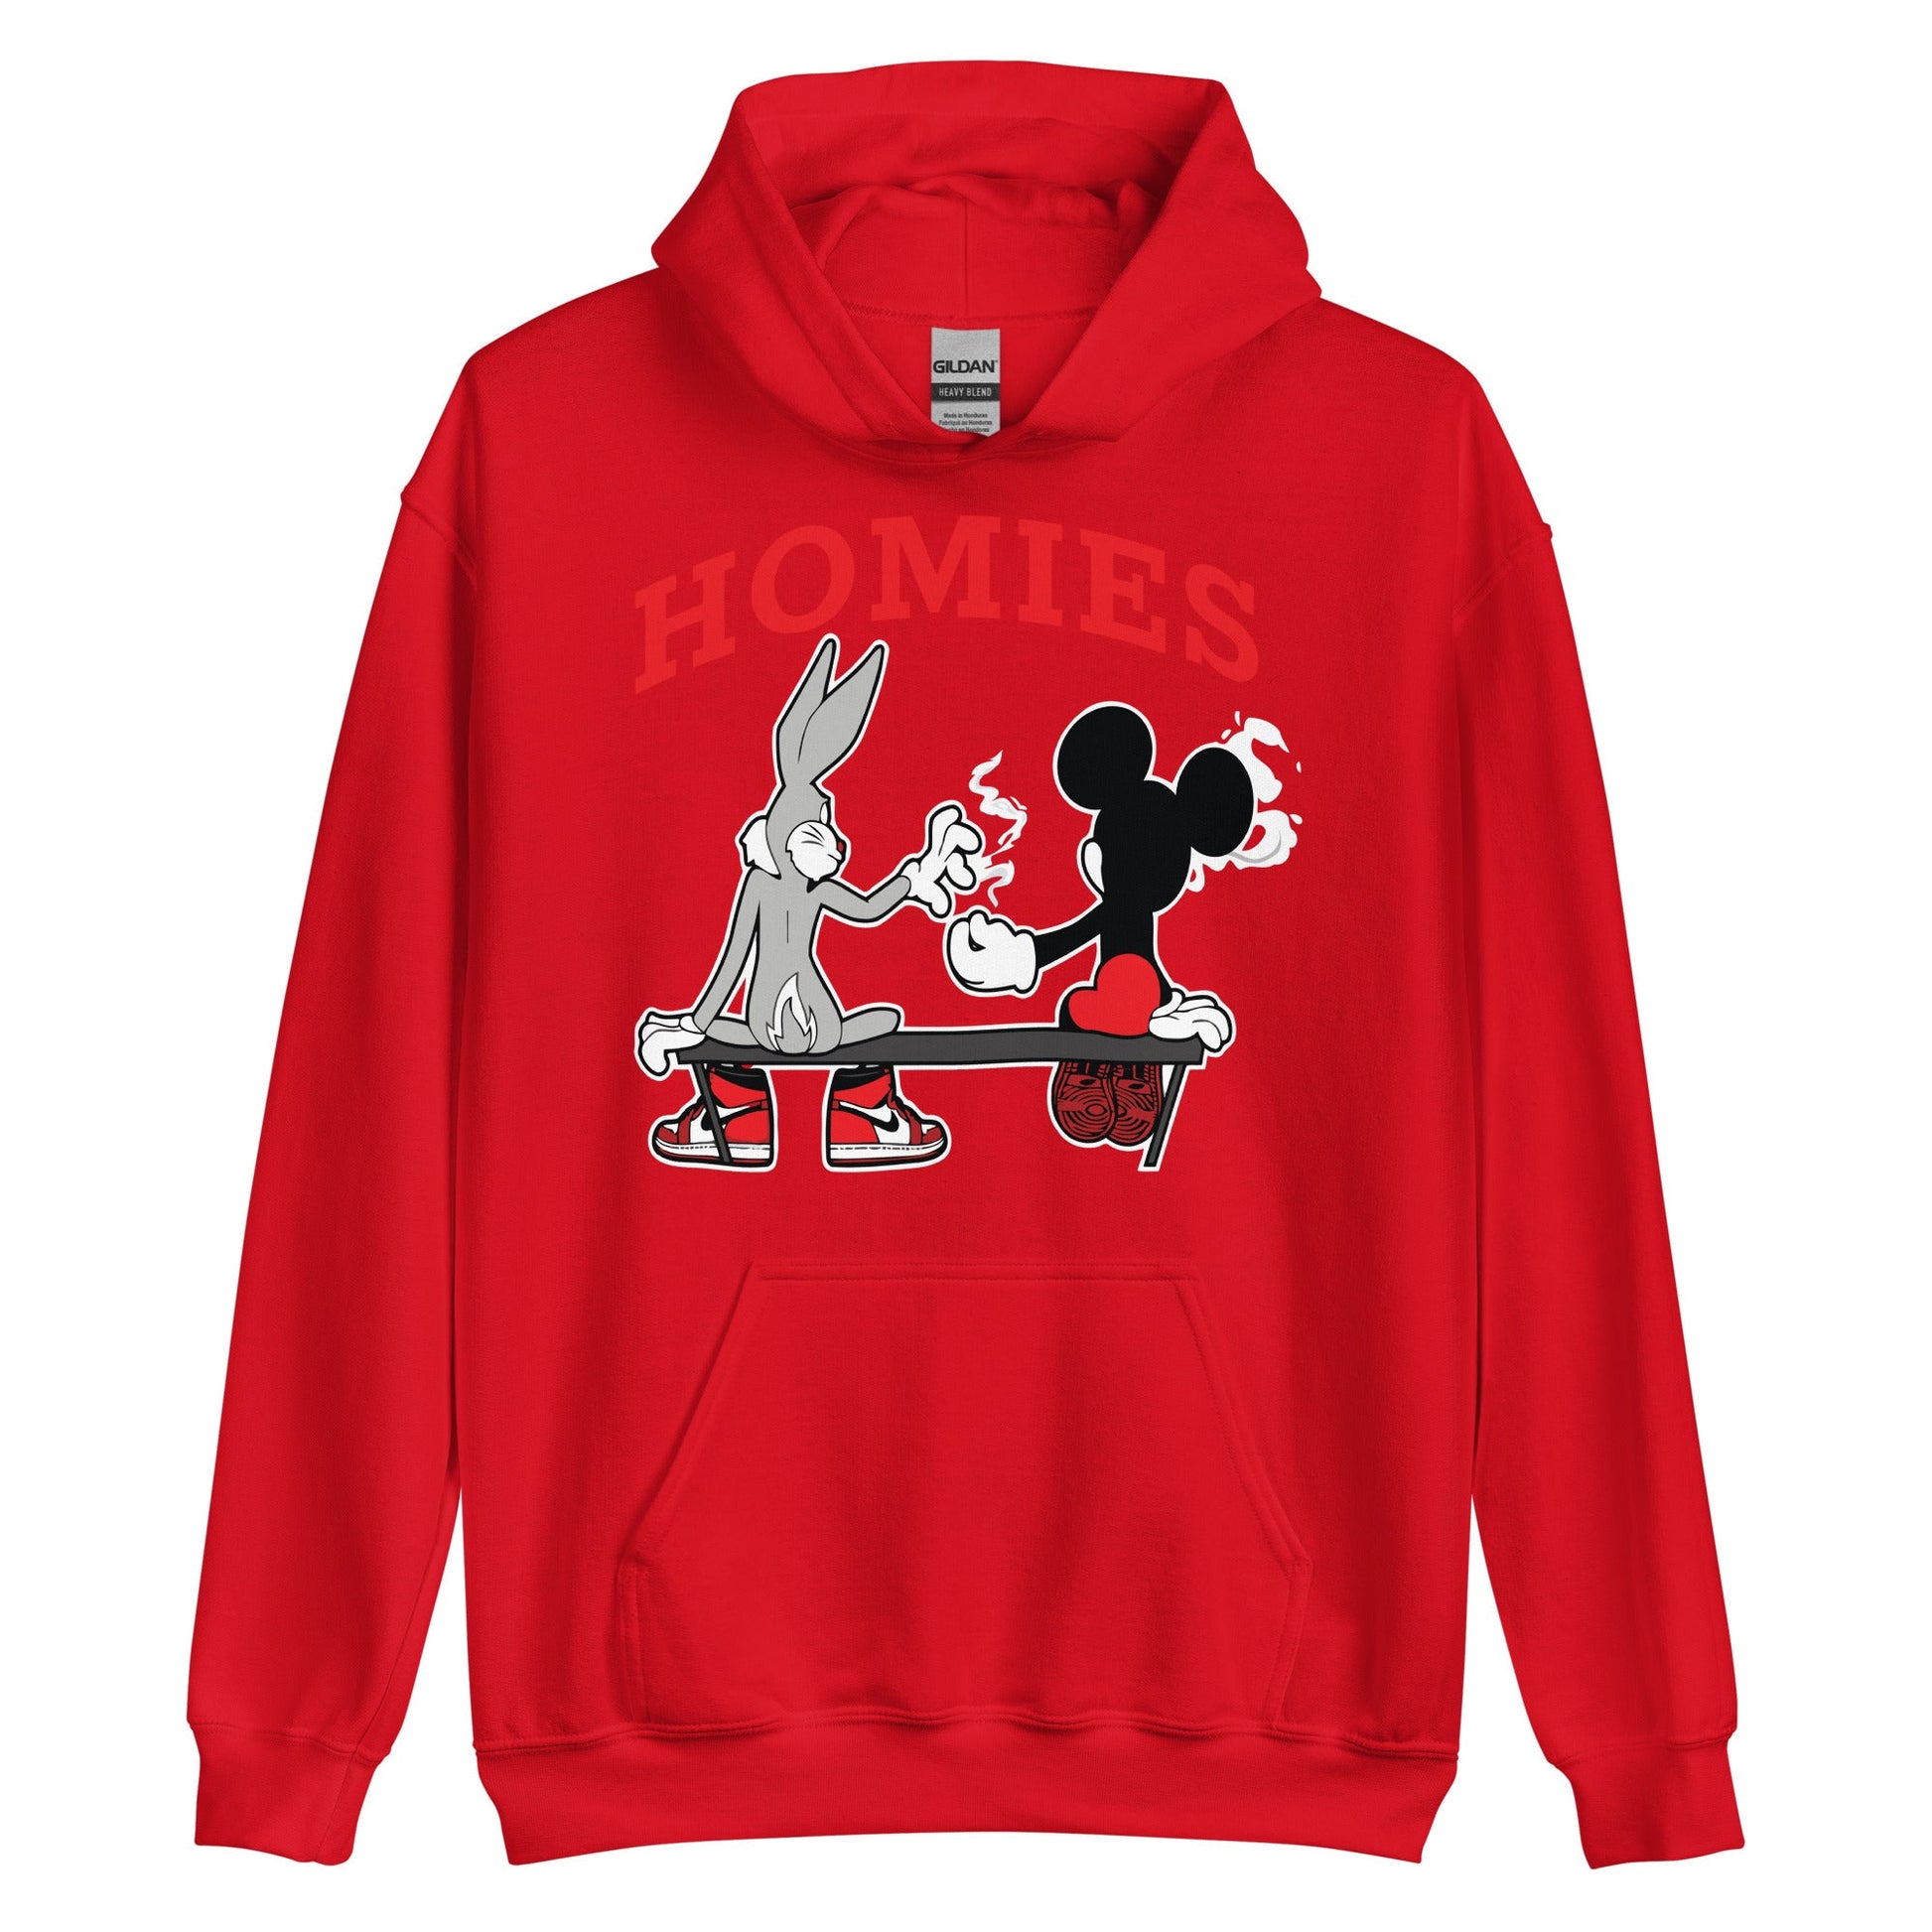 Homies Bugs Bunny and Mickey Mouse - The Truth Graphics